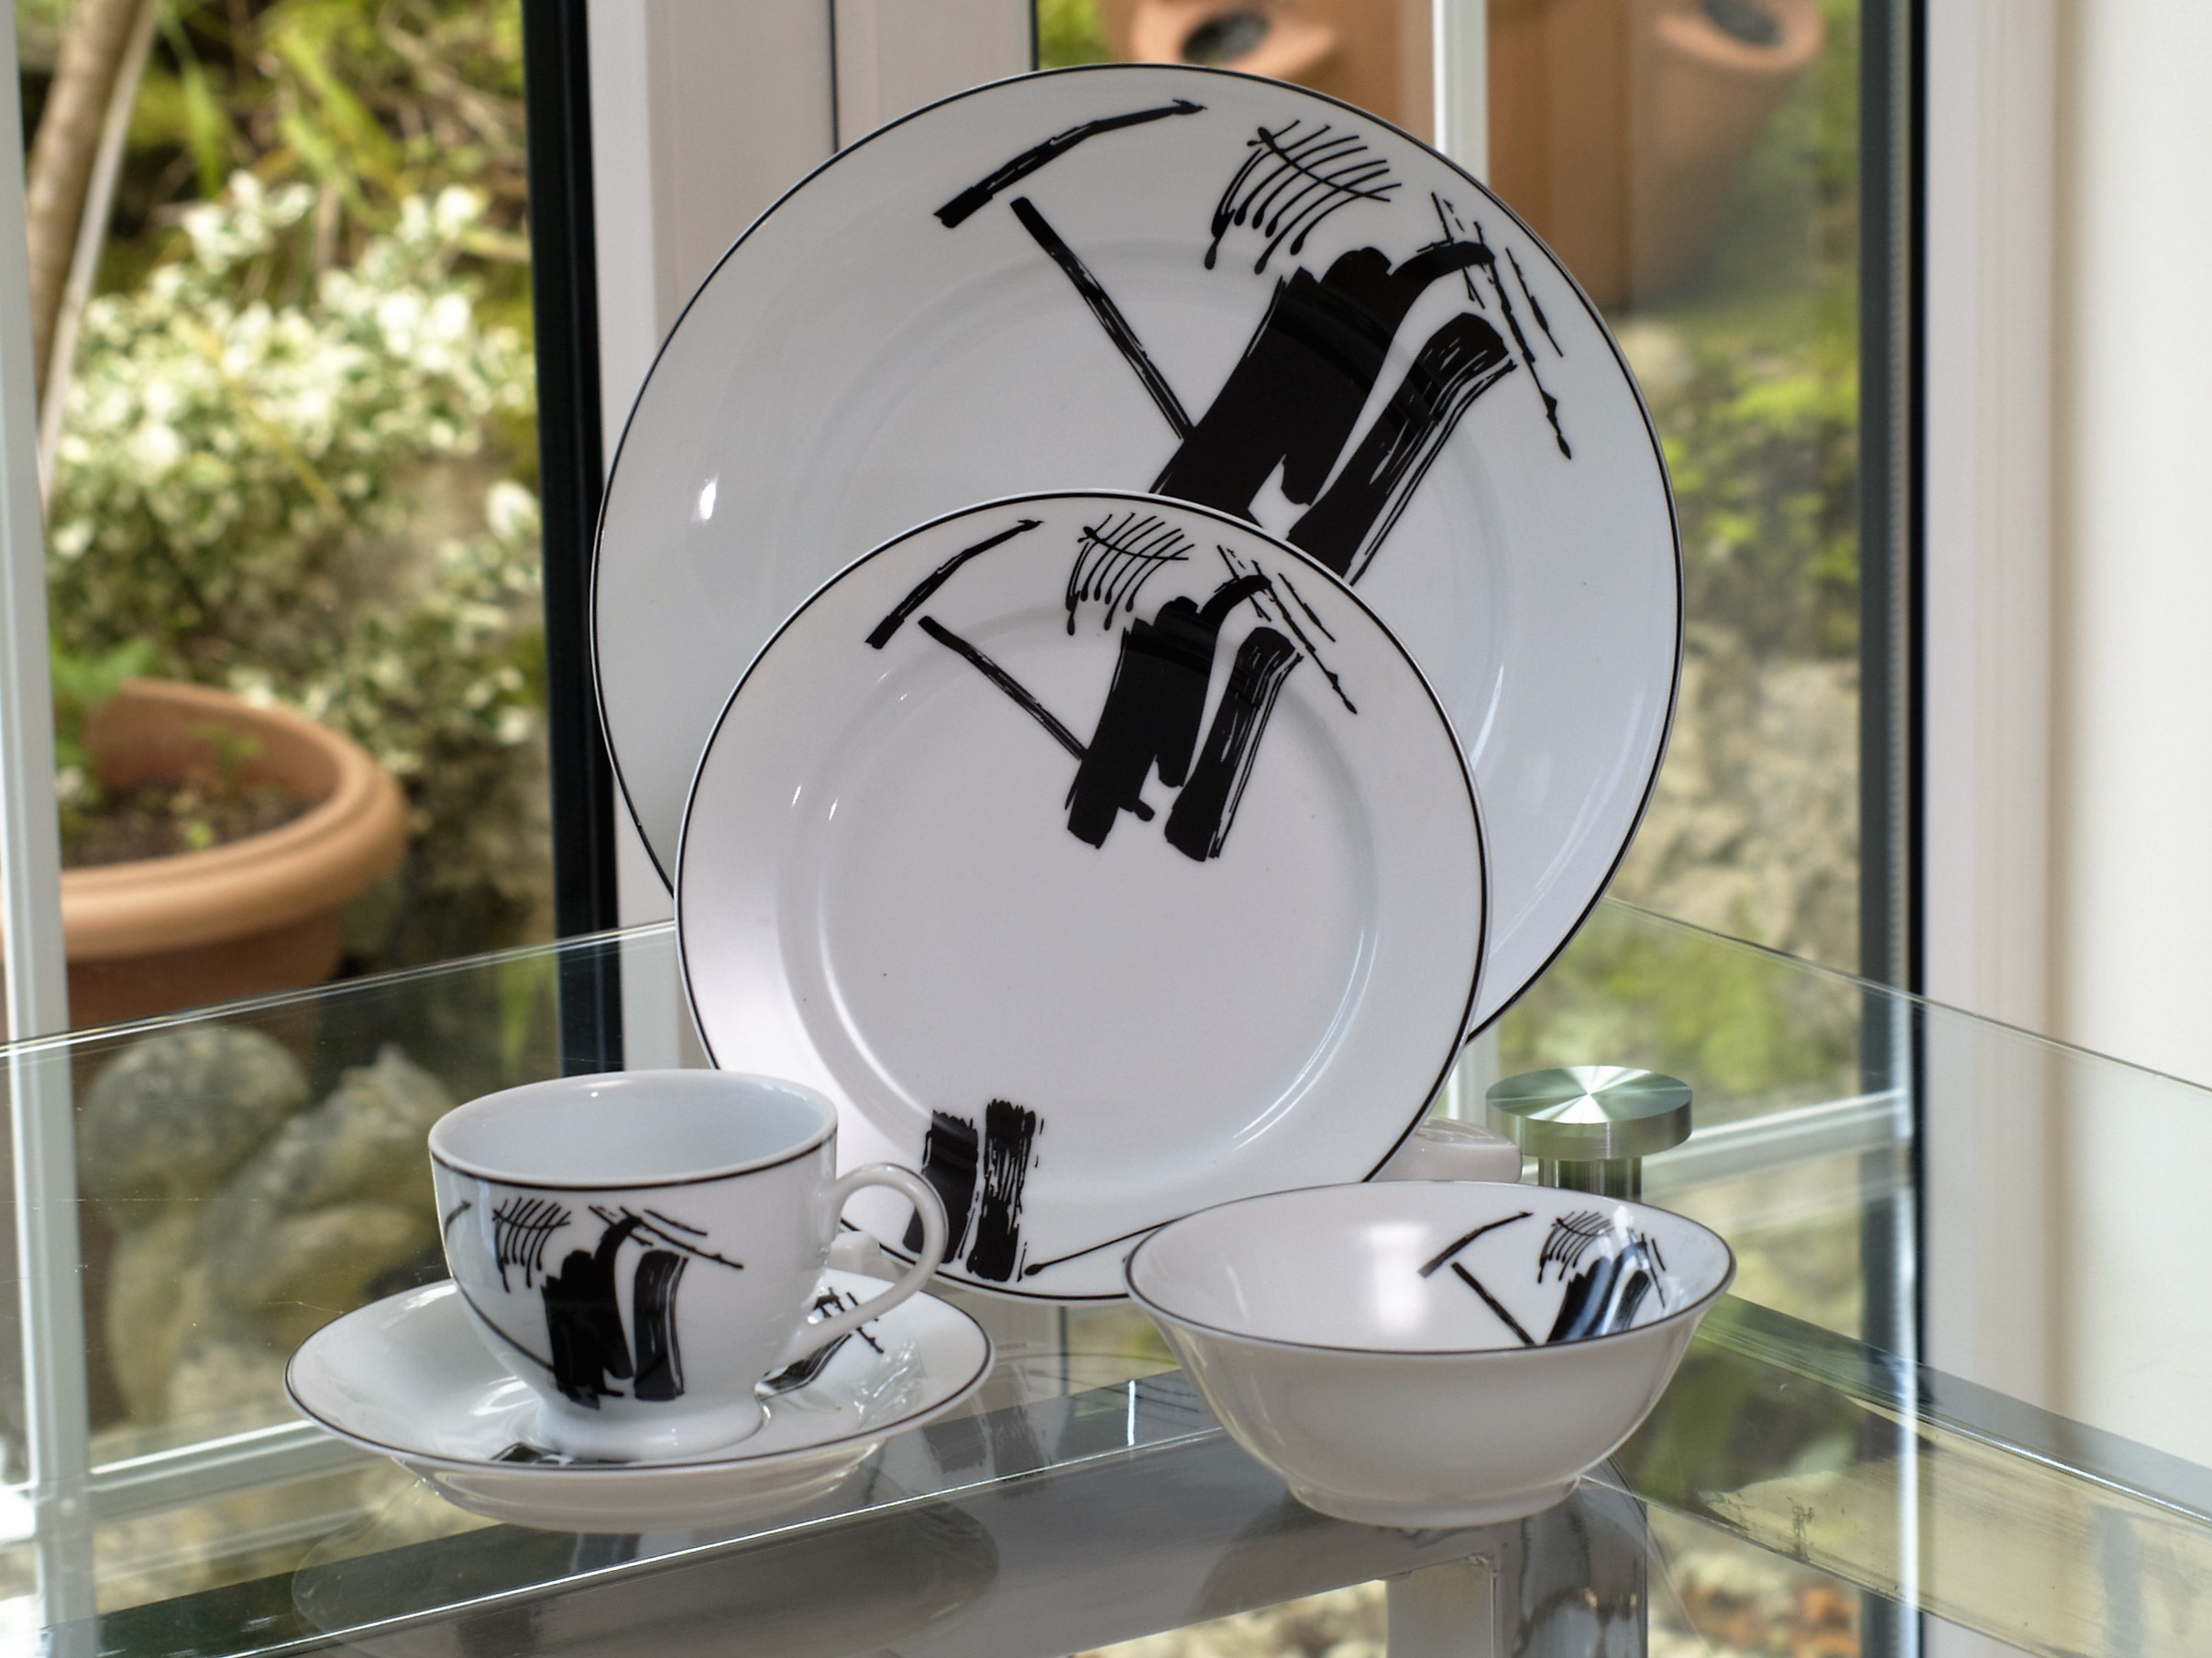 ABSTRACT 28 PIECE DINNER SERVICE